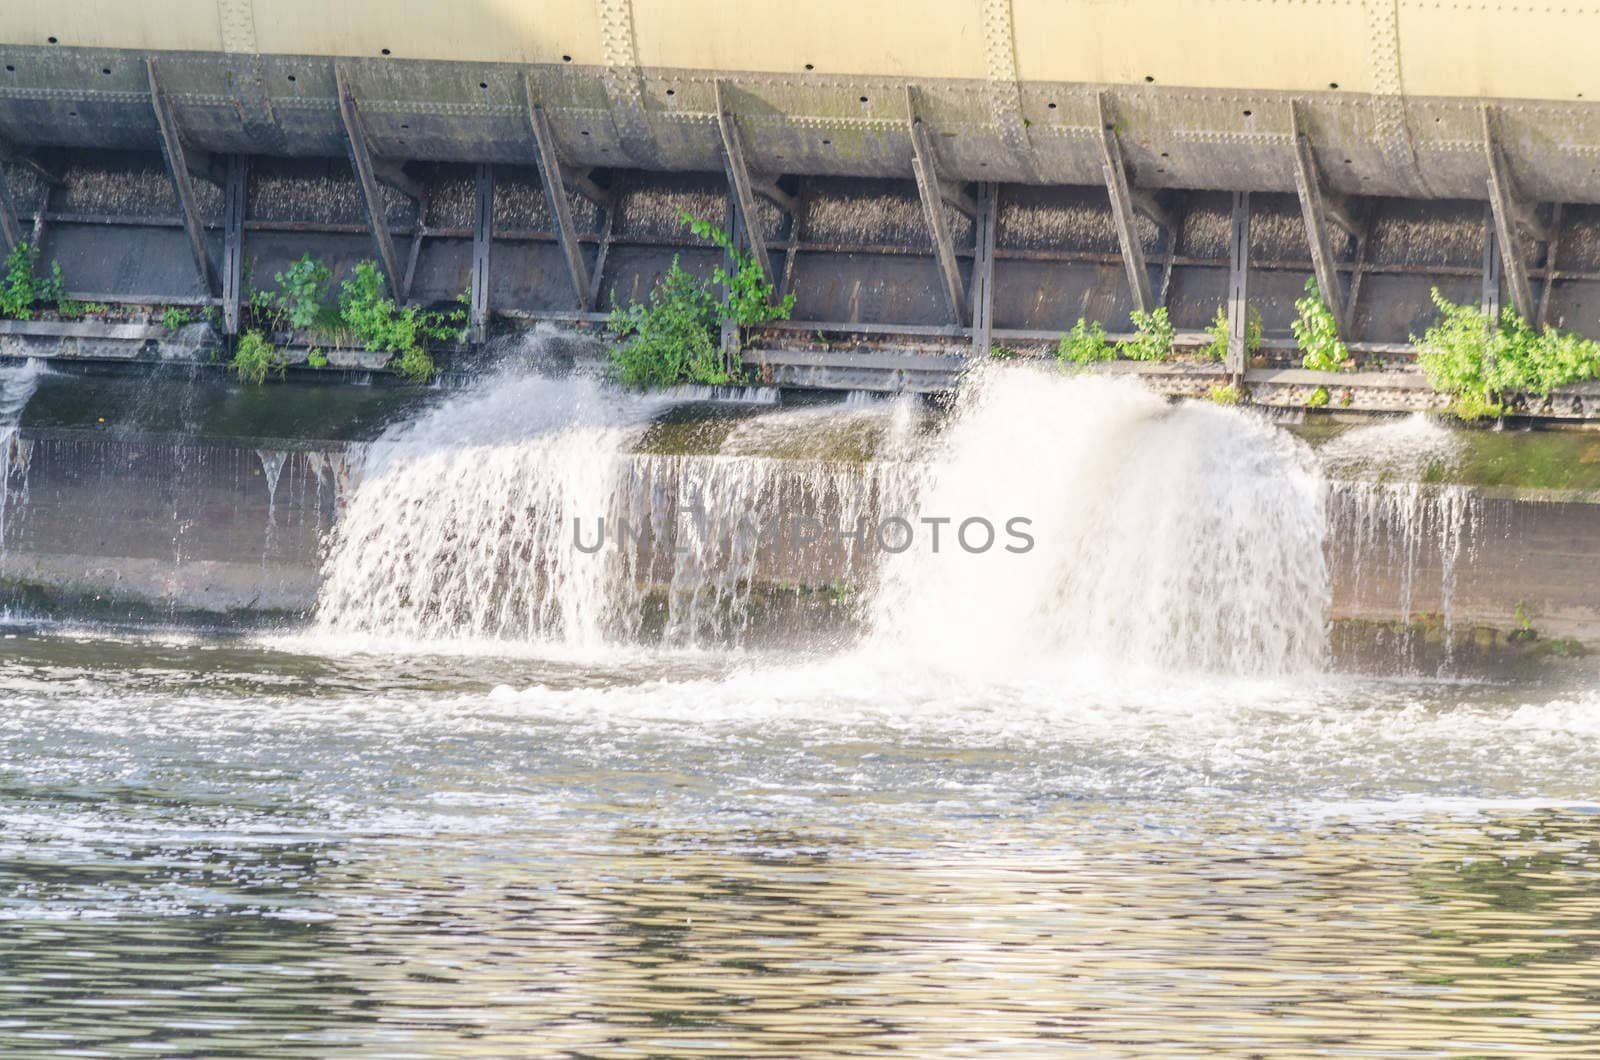 Dam old hydroelectric power plant       by JFsPic